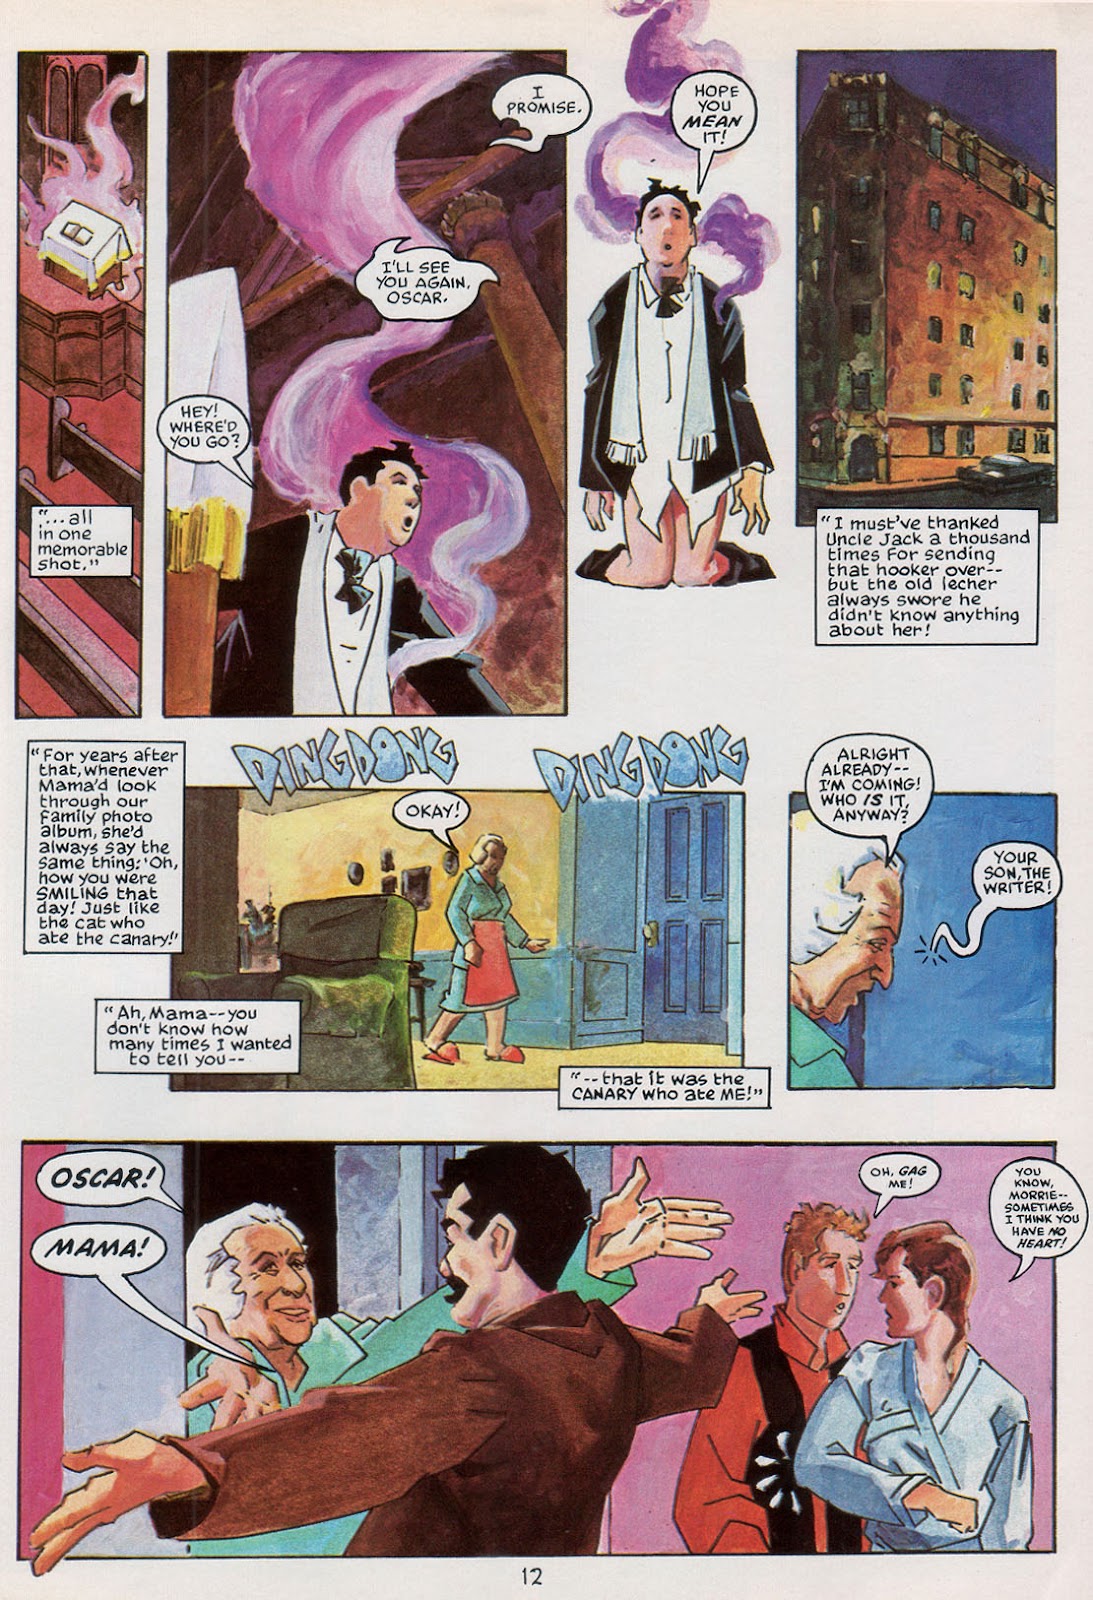 Marvel Graphic Novel issue 20 - Greenberg the Vampire - Page 16